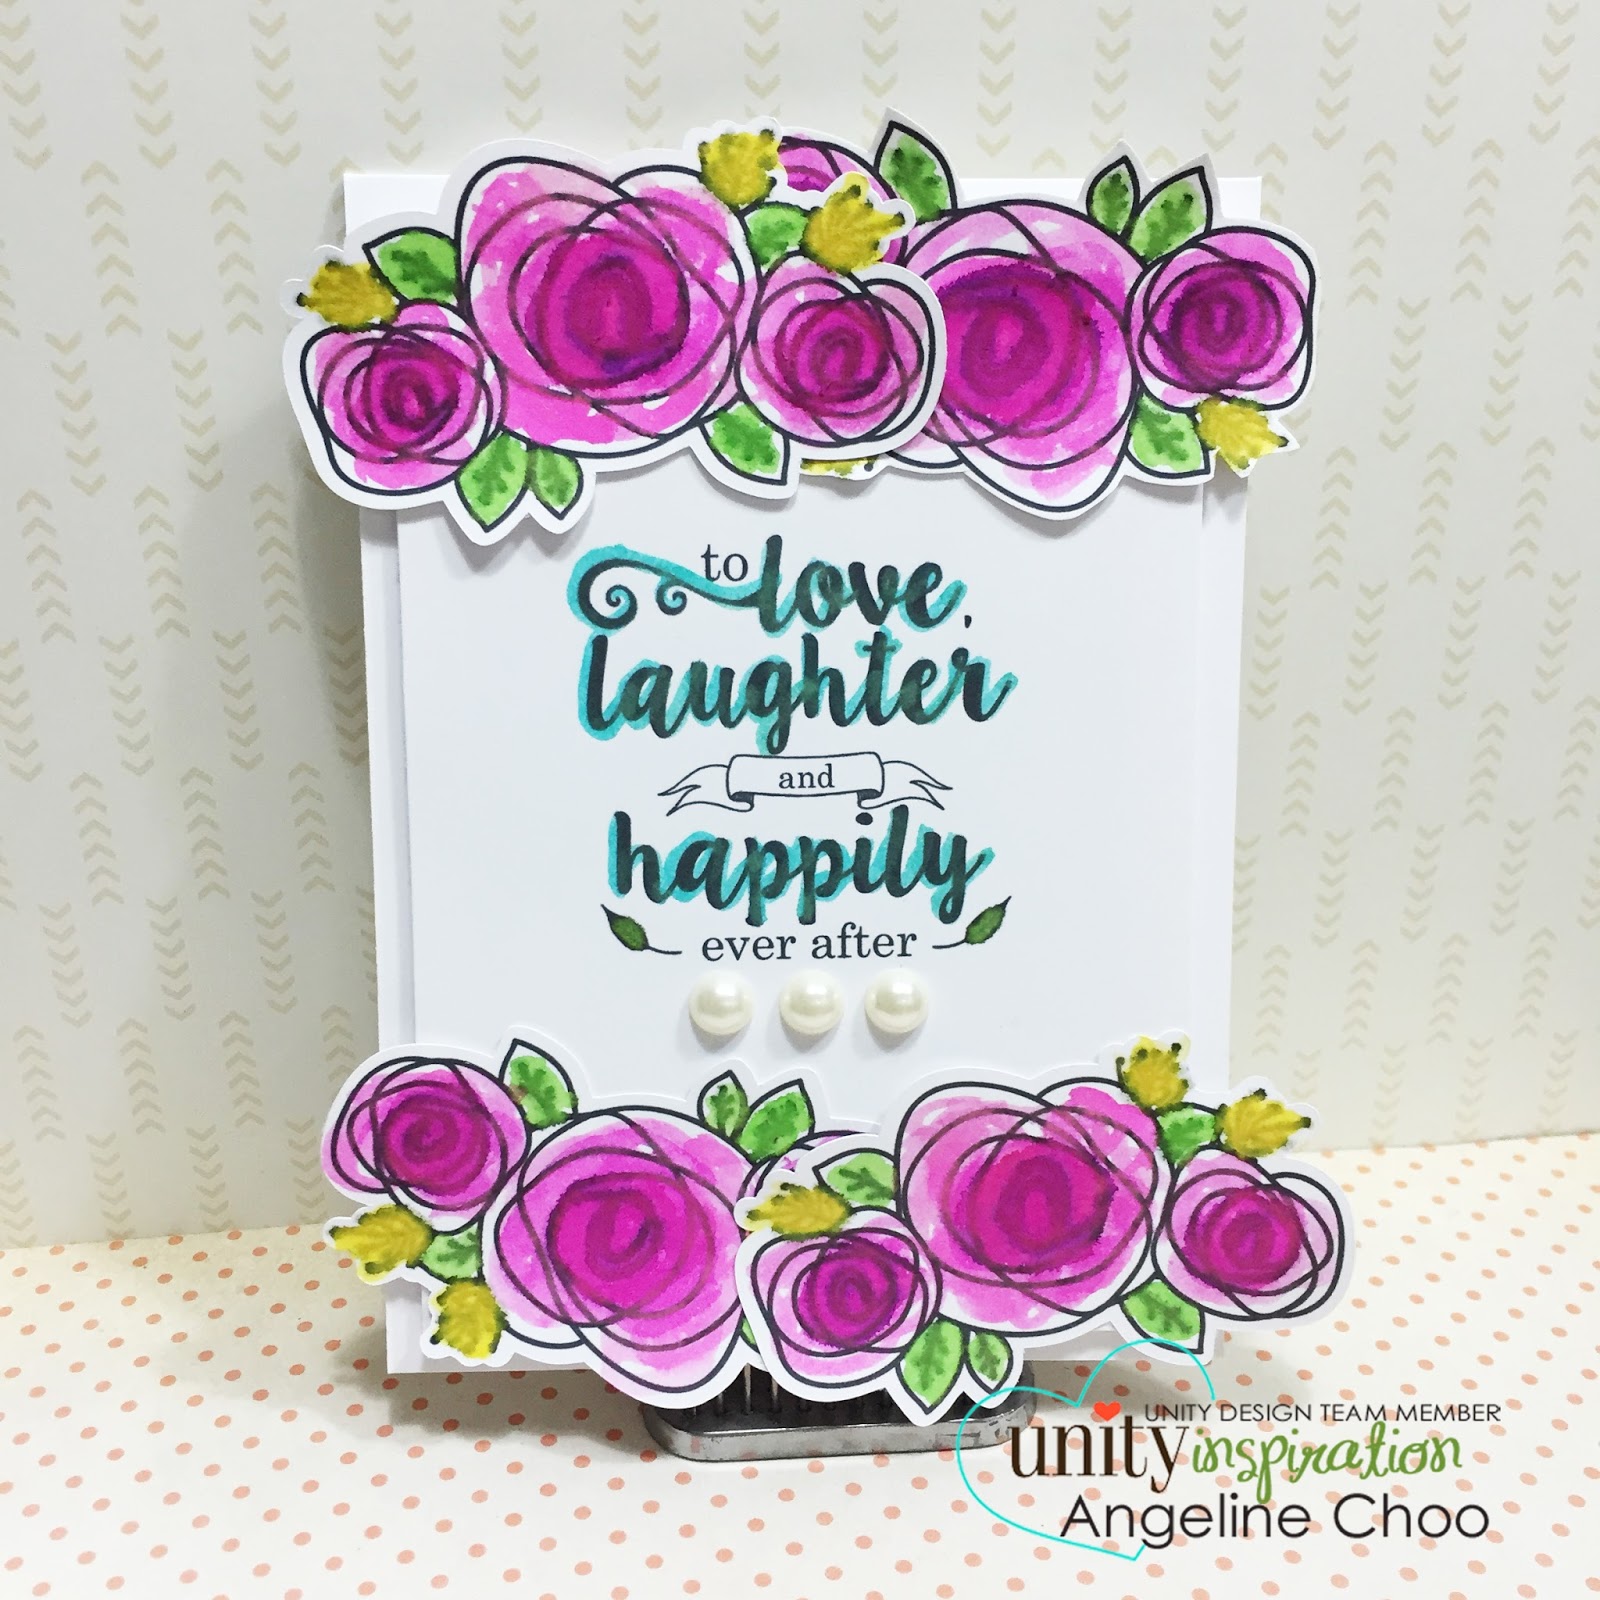 ScrappyScrappy: Love, laughter and happily ever after #scrappyscrappy #unitystamp #card #dylusions #stamp